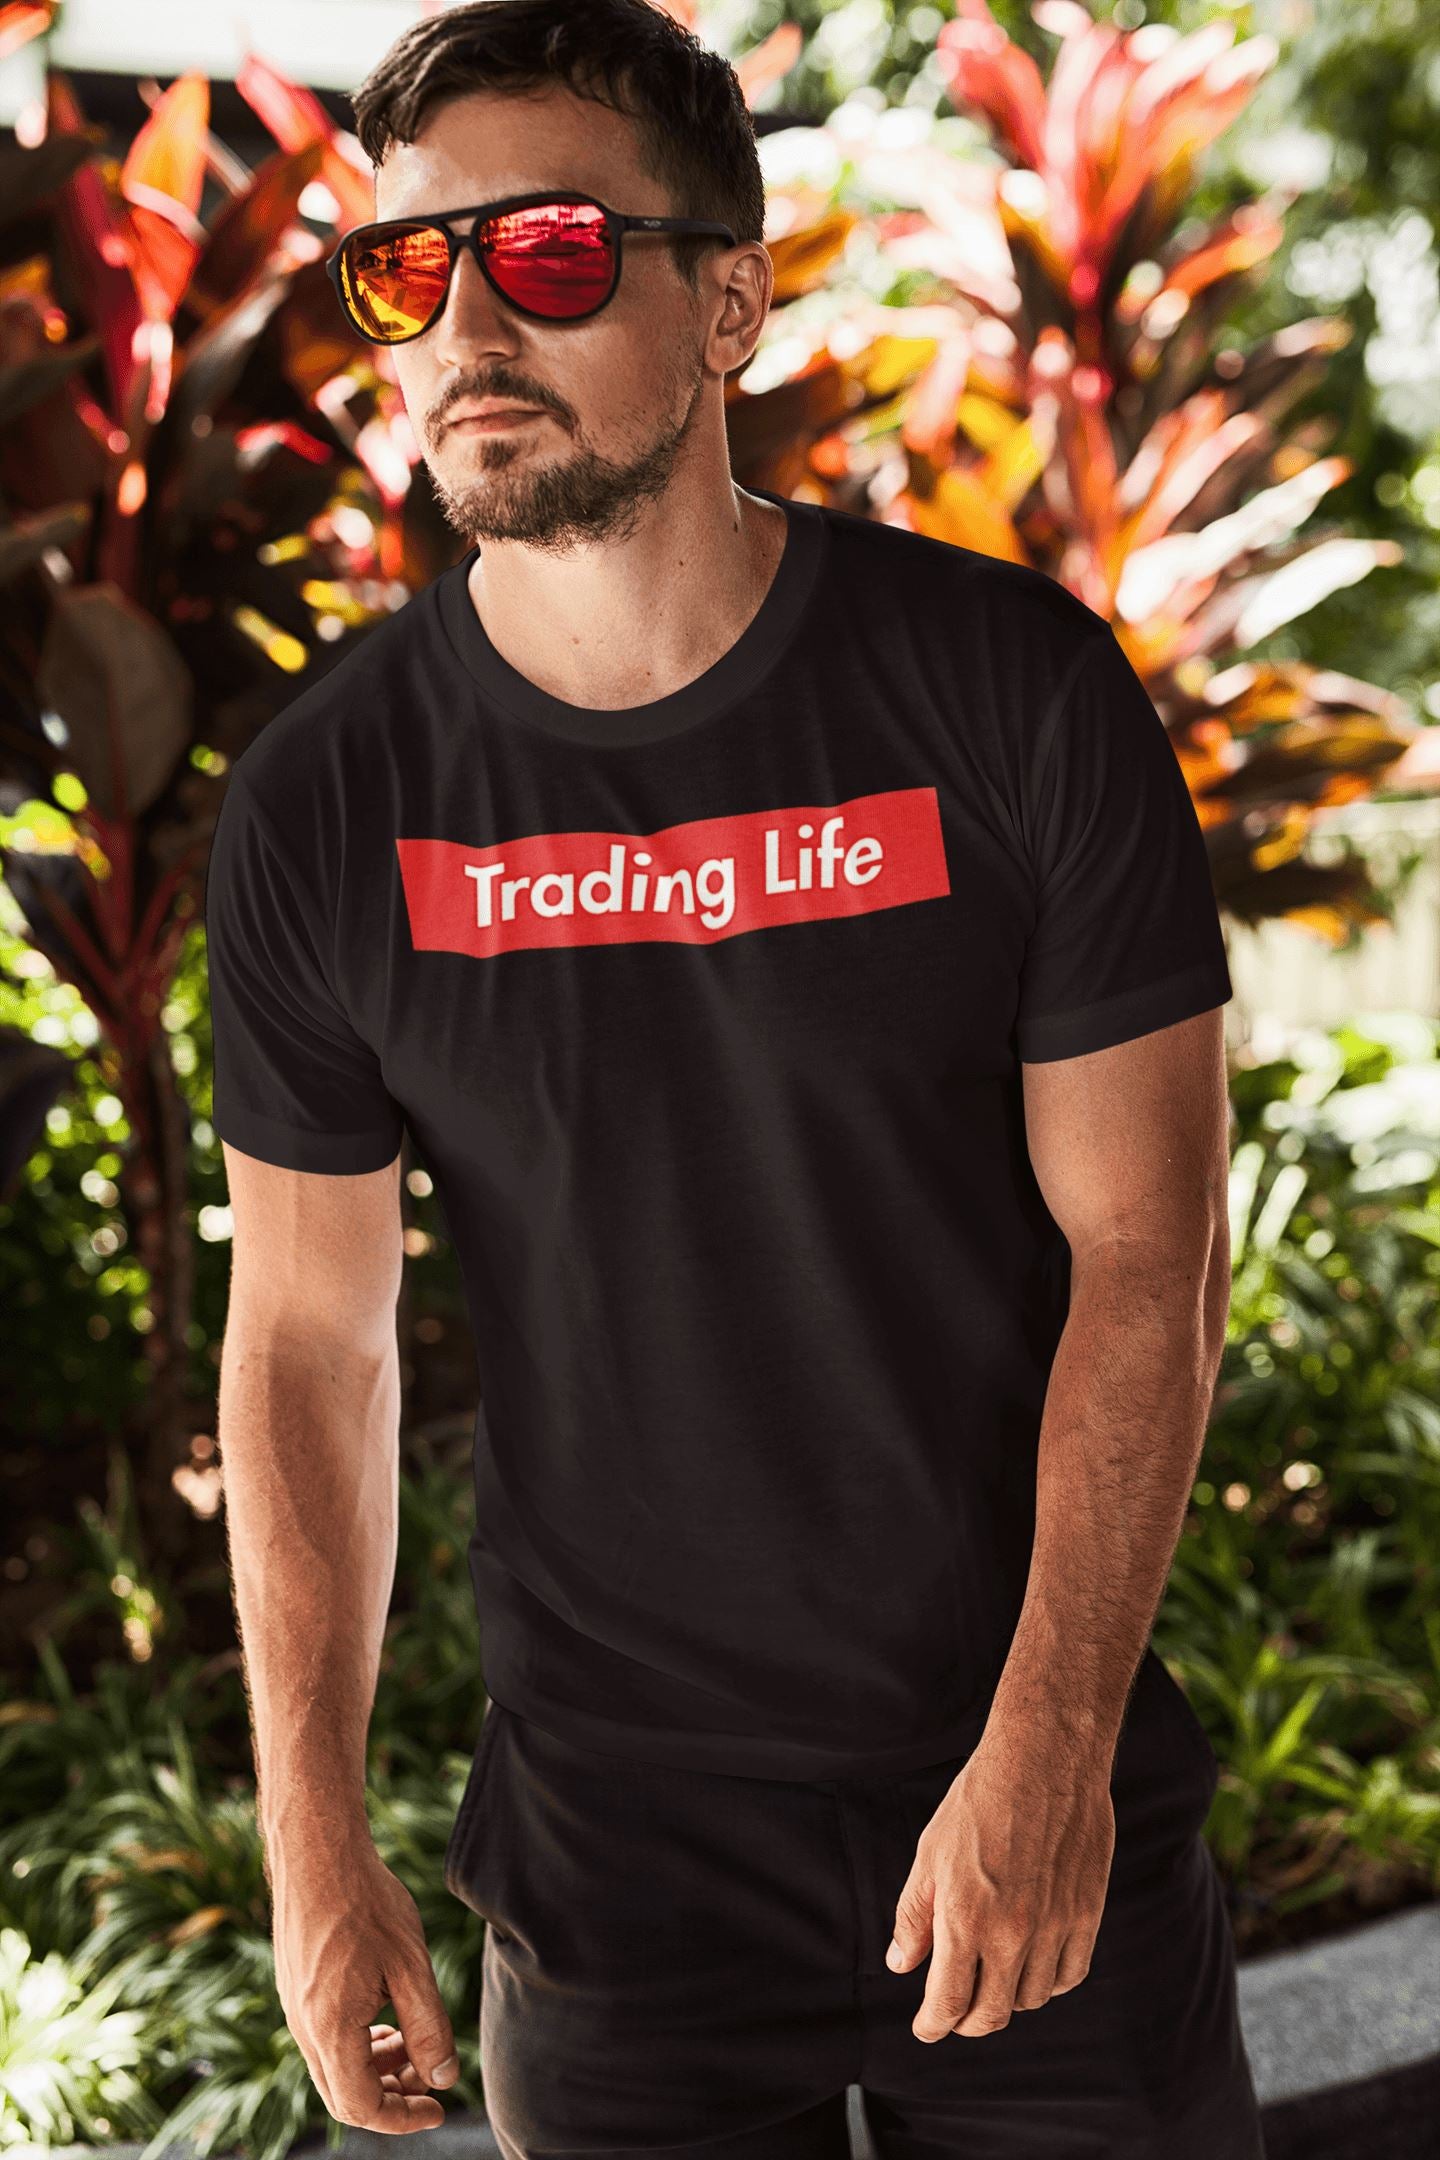 Trading Life Special T Shirt for Men and Women - Catch My Drift India  black, clothing, made in india, shirt, stock, stock market, t shirt, trader, traders, trading, trending, tshirt